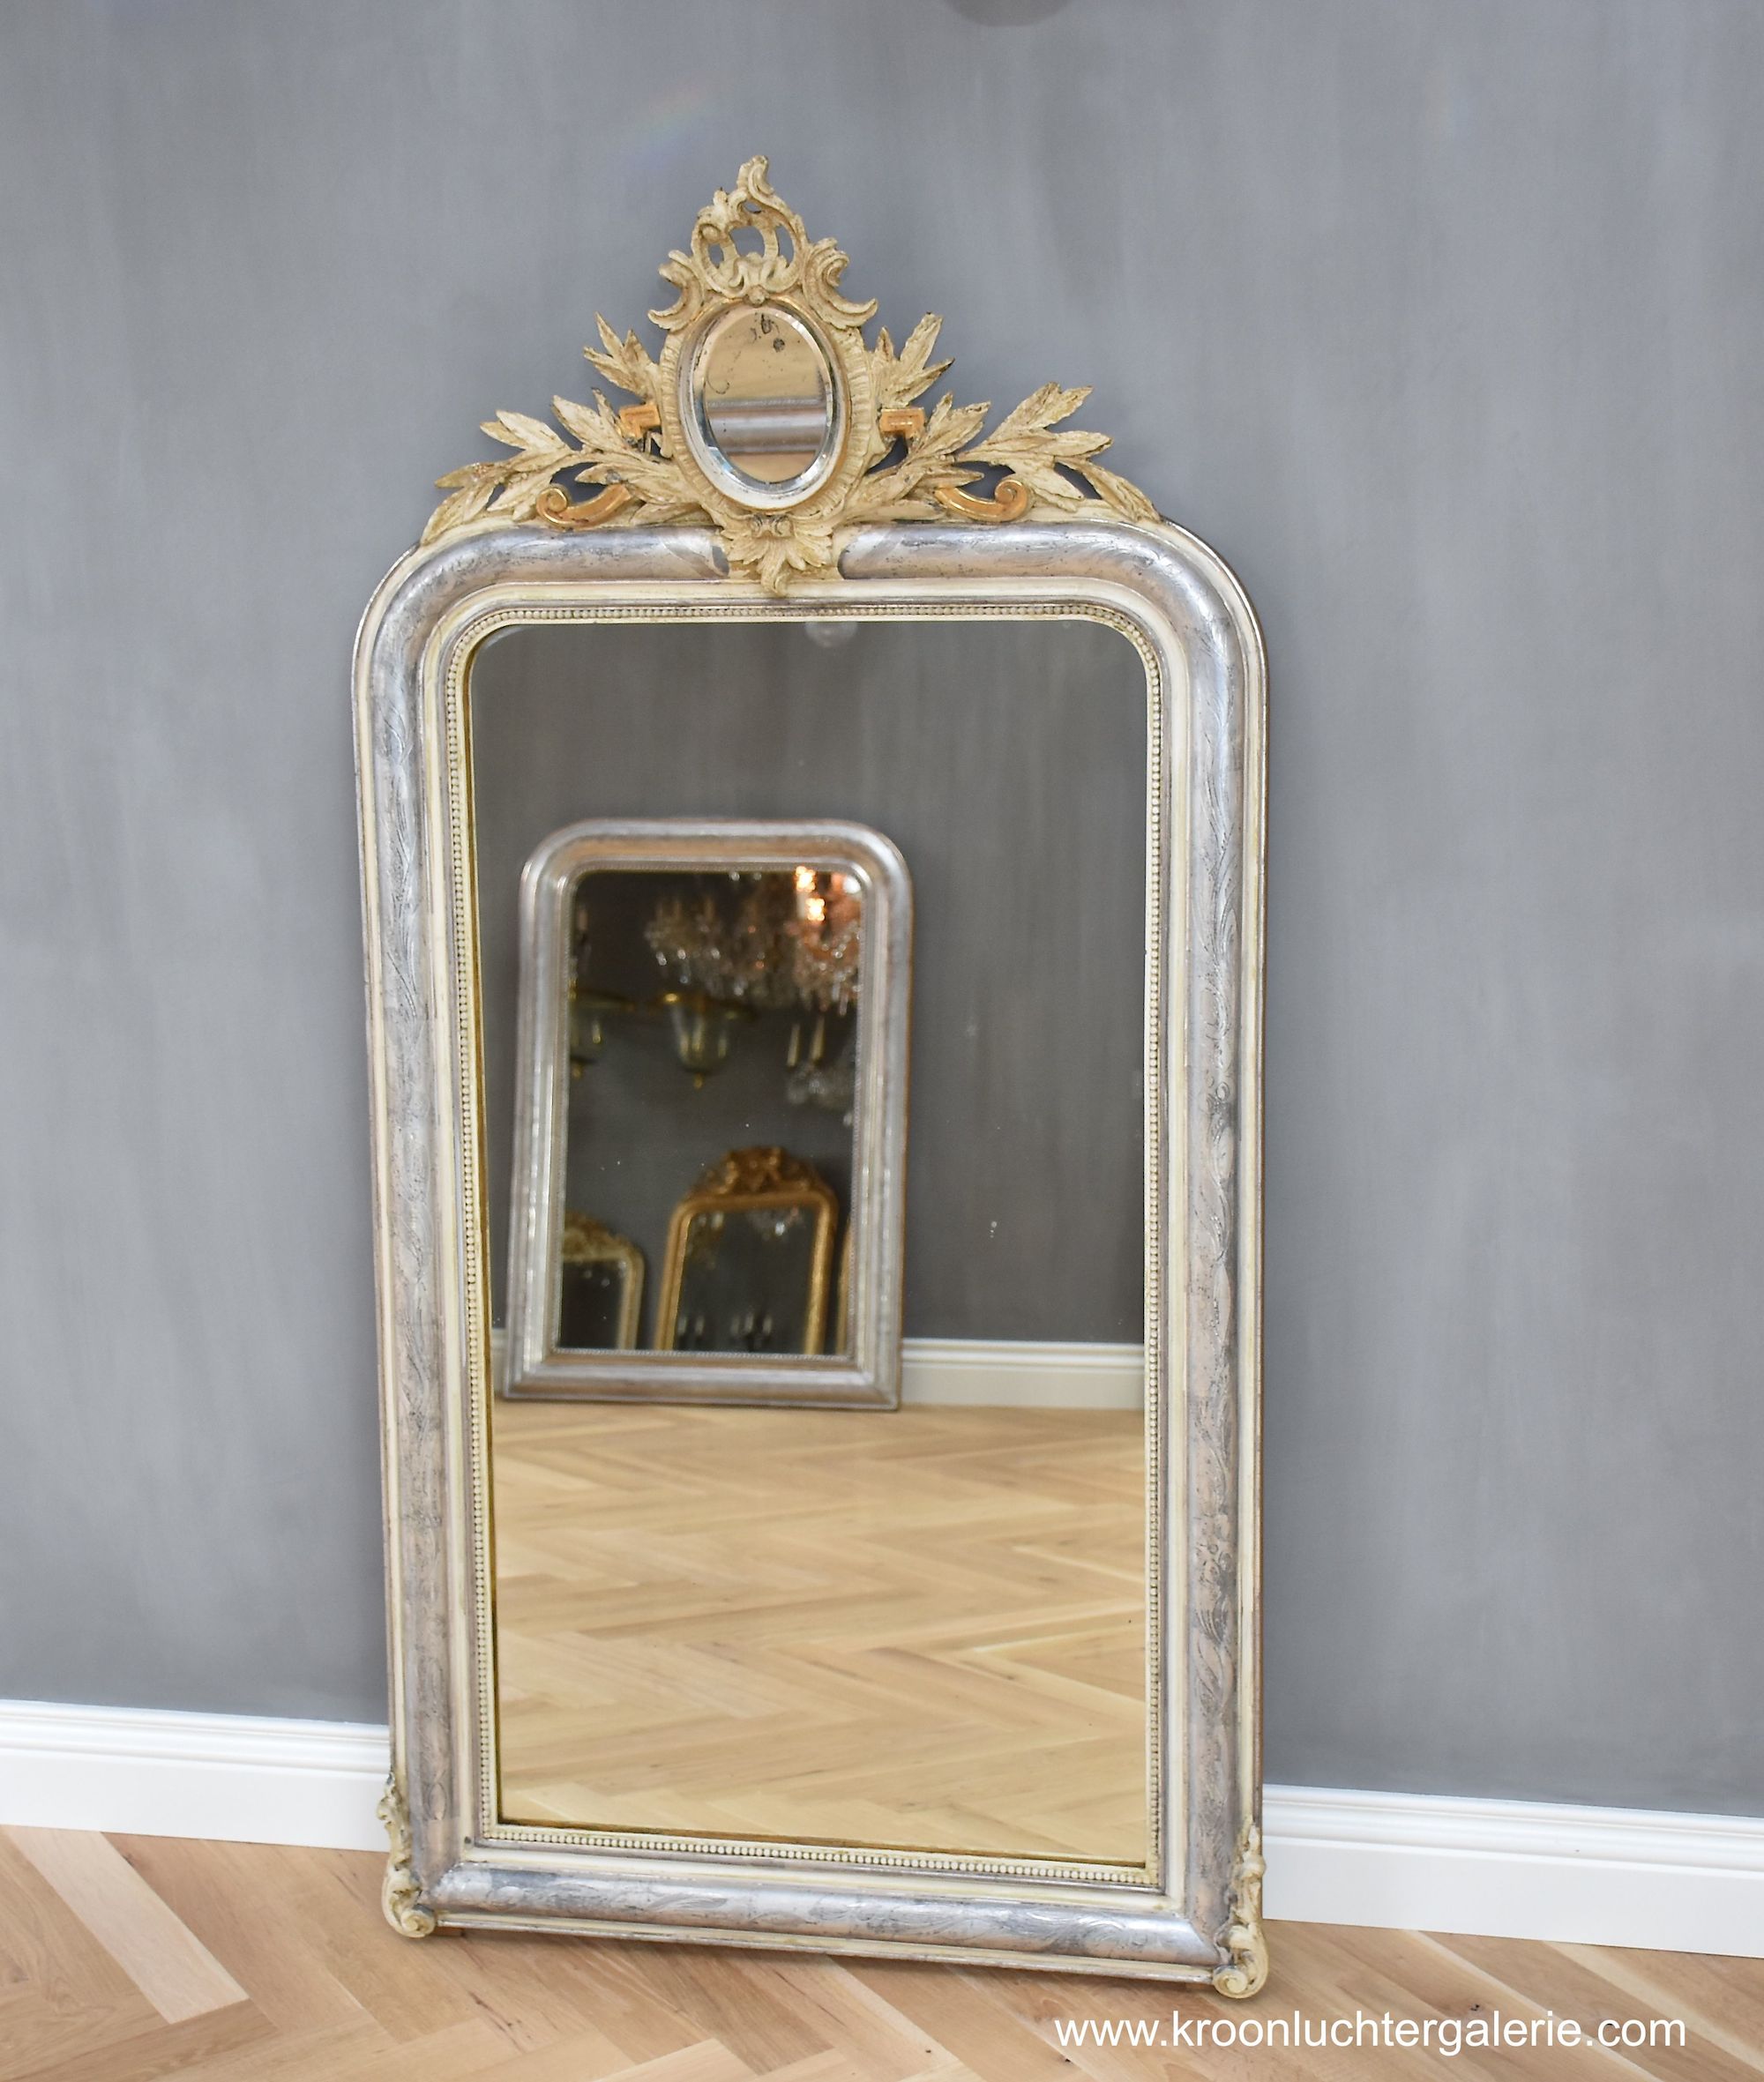 19th century French mirror with a crest